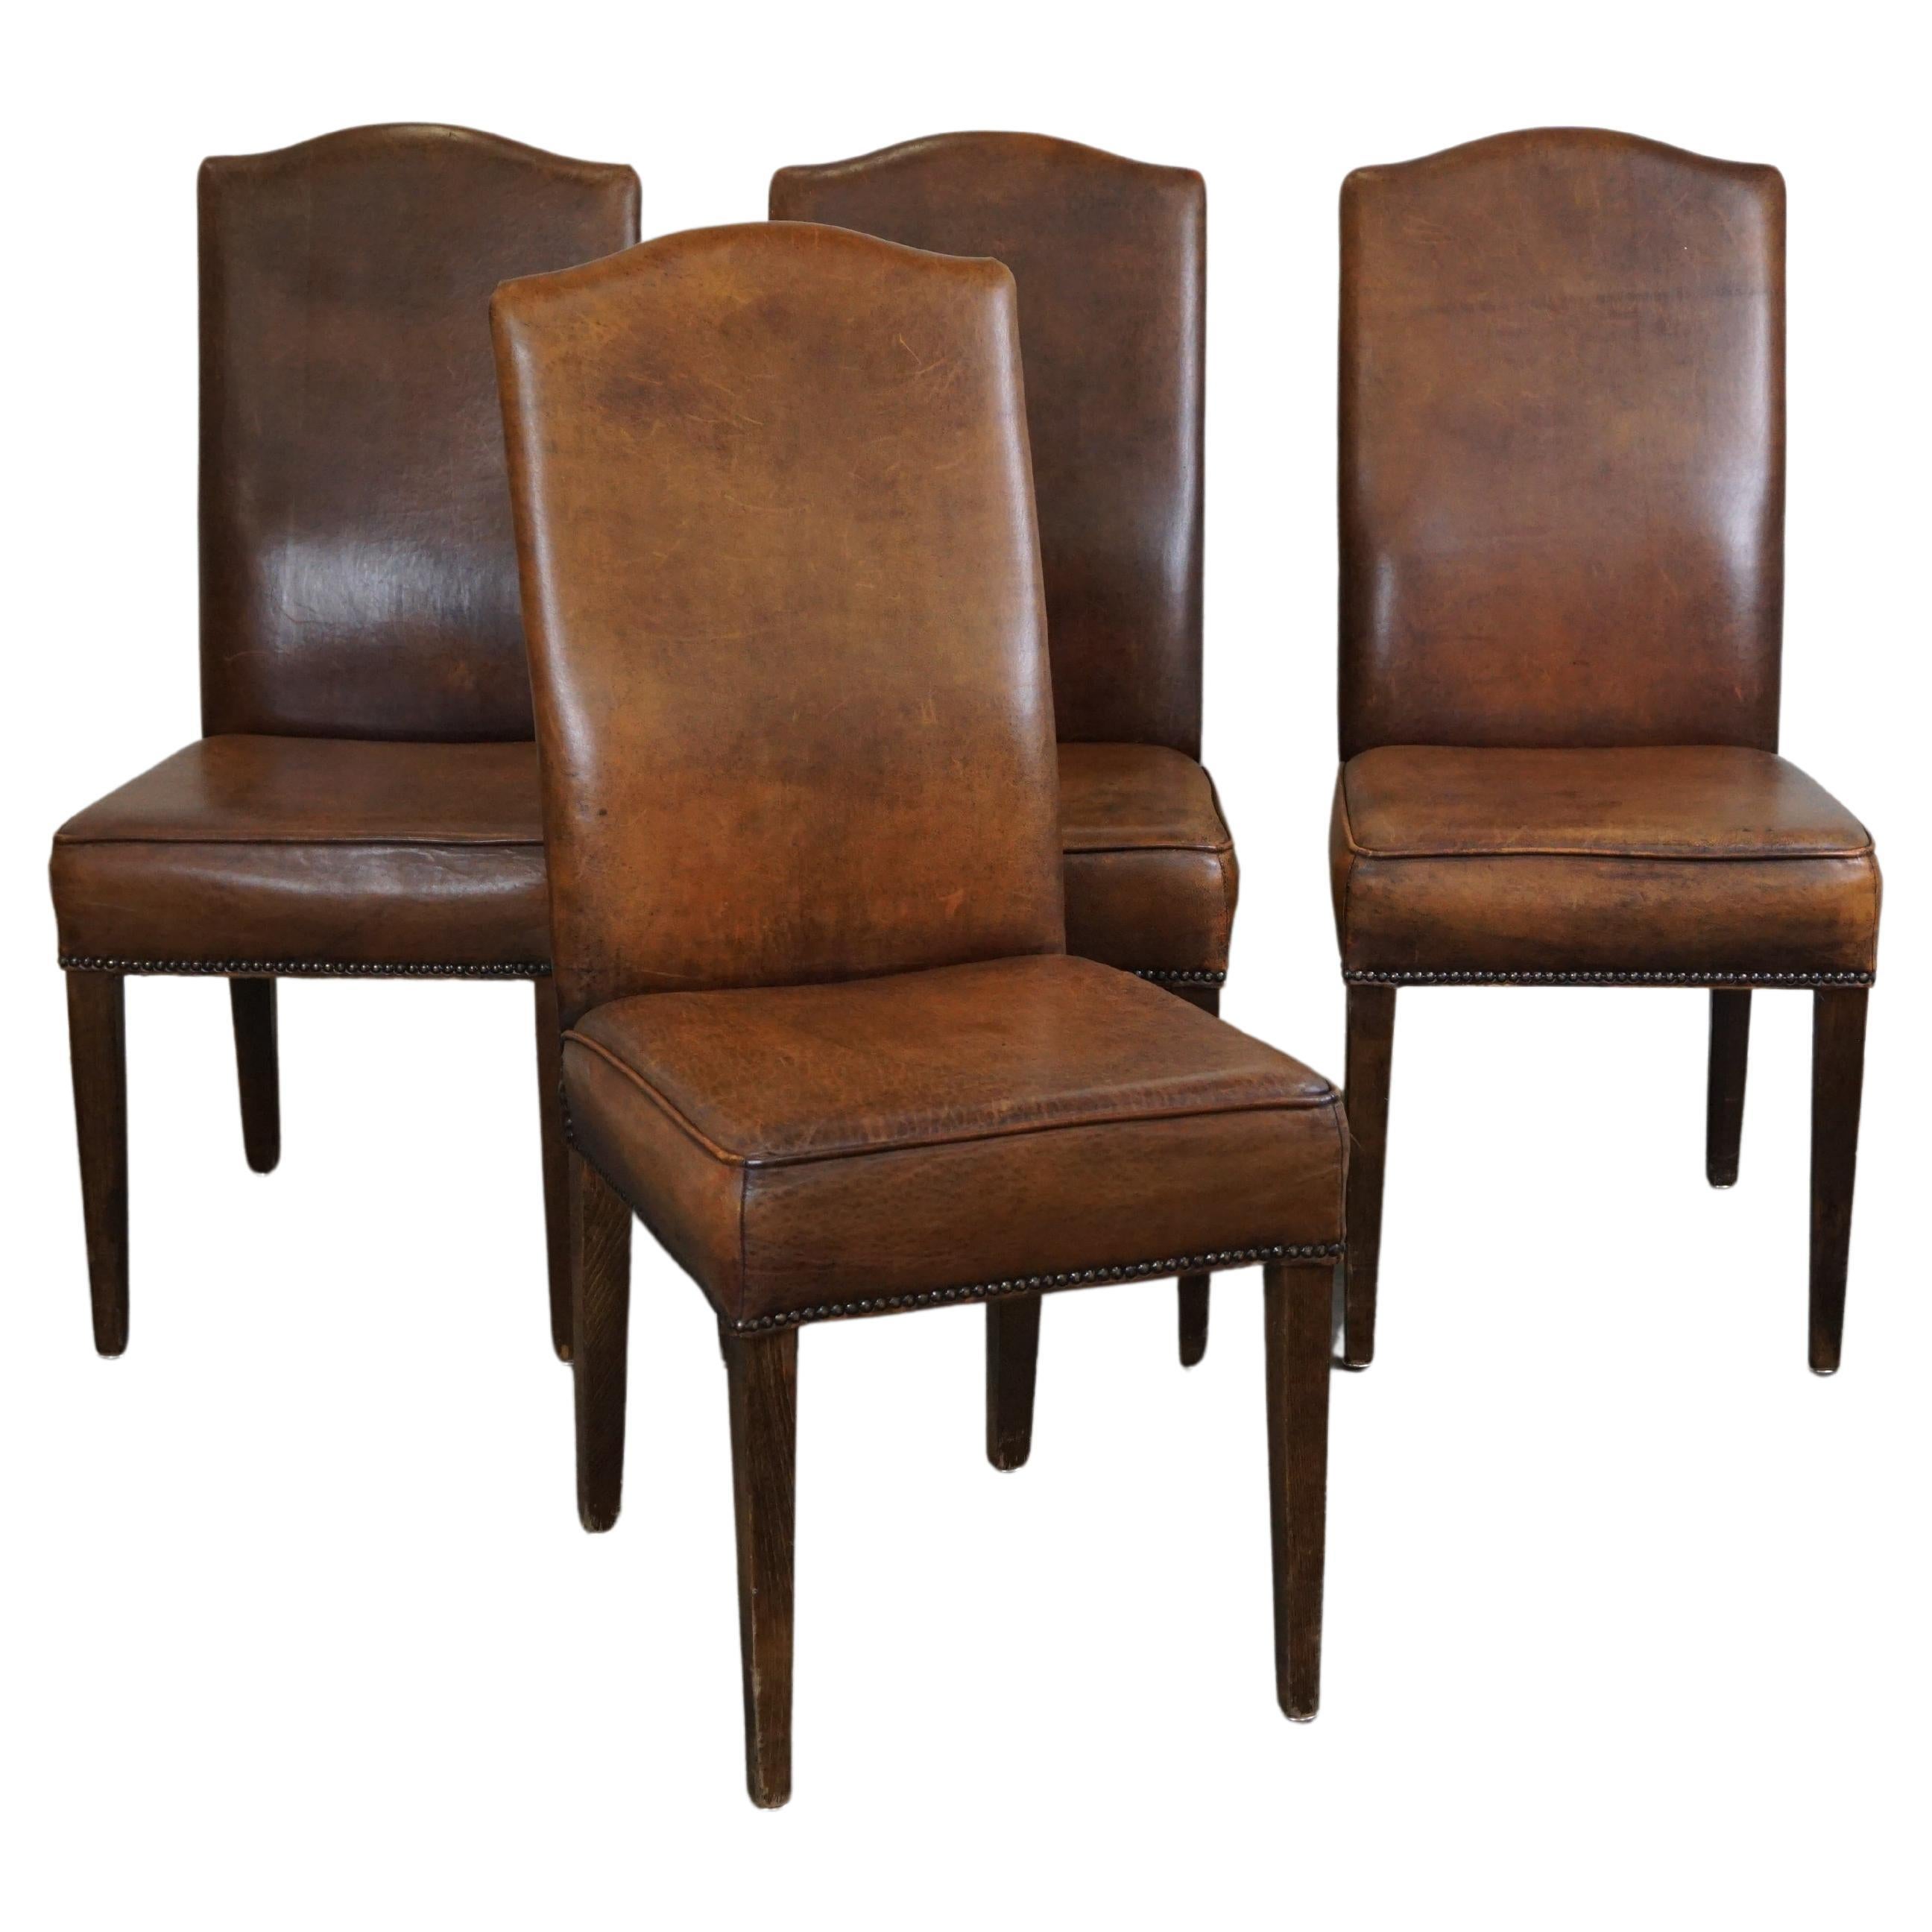 Set of 4 cognac-colored sheep leather dining chairs with a beautiful patina For Sale